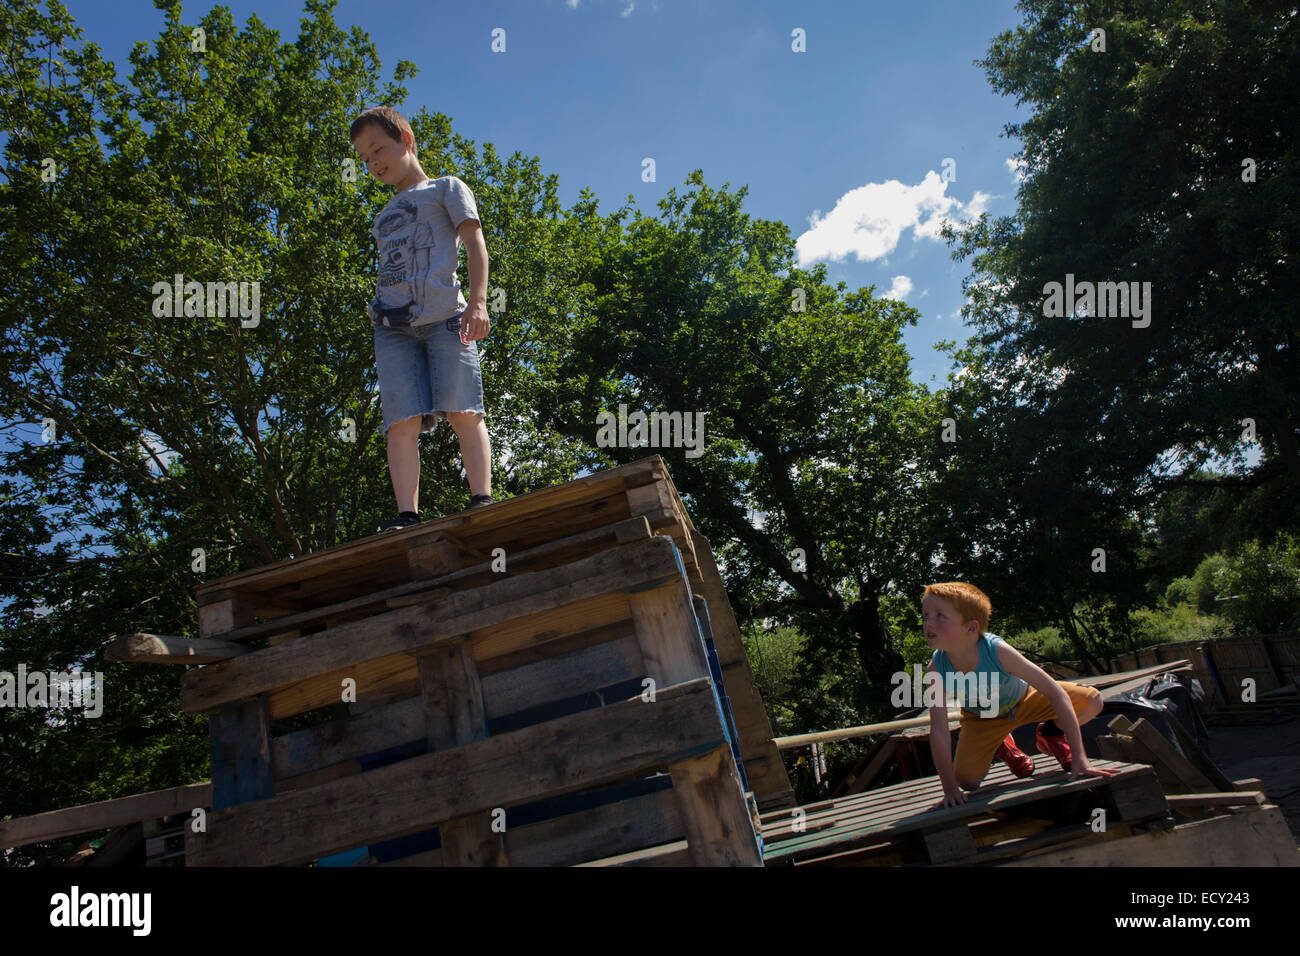 Boys play in risk averse playground called The Land on Plas Madoc Estate, Ruabon, Wrexham, Wales. Stock Photo